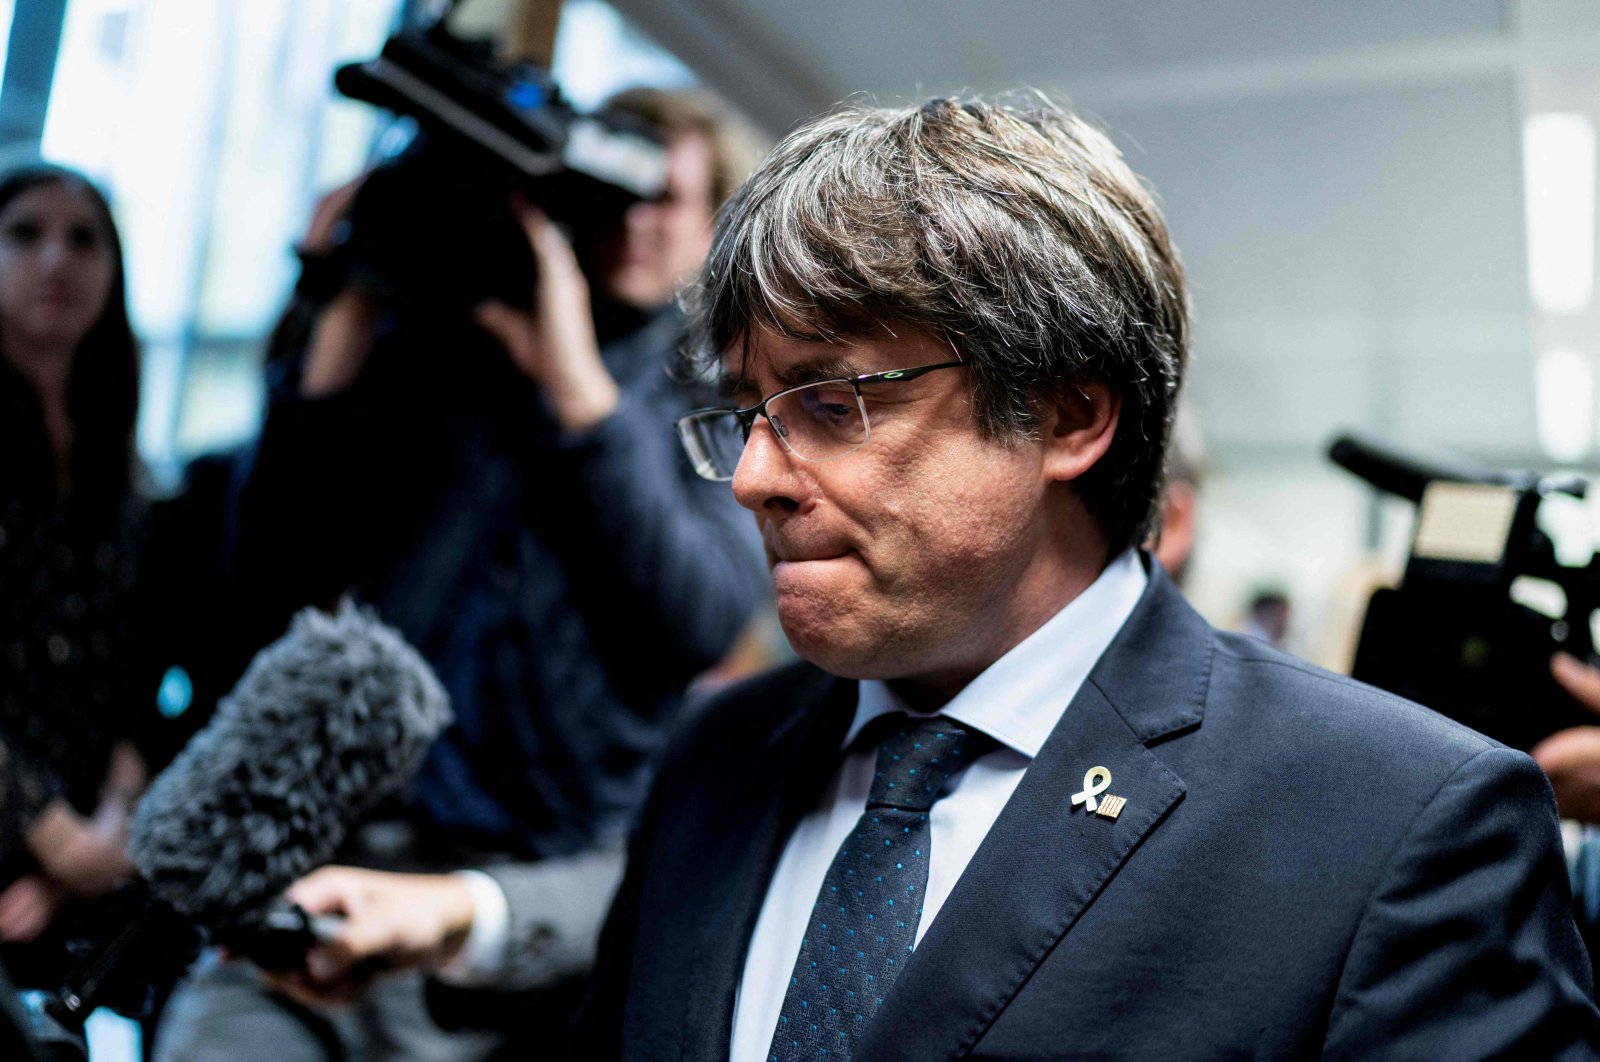 Former Catalan premier Carles Puigdemont leaves after a press conference in Brussels, Belgium, Oct. 14, 2019. (AFP Photo)